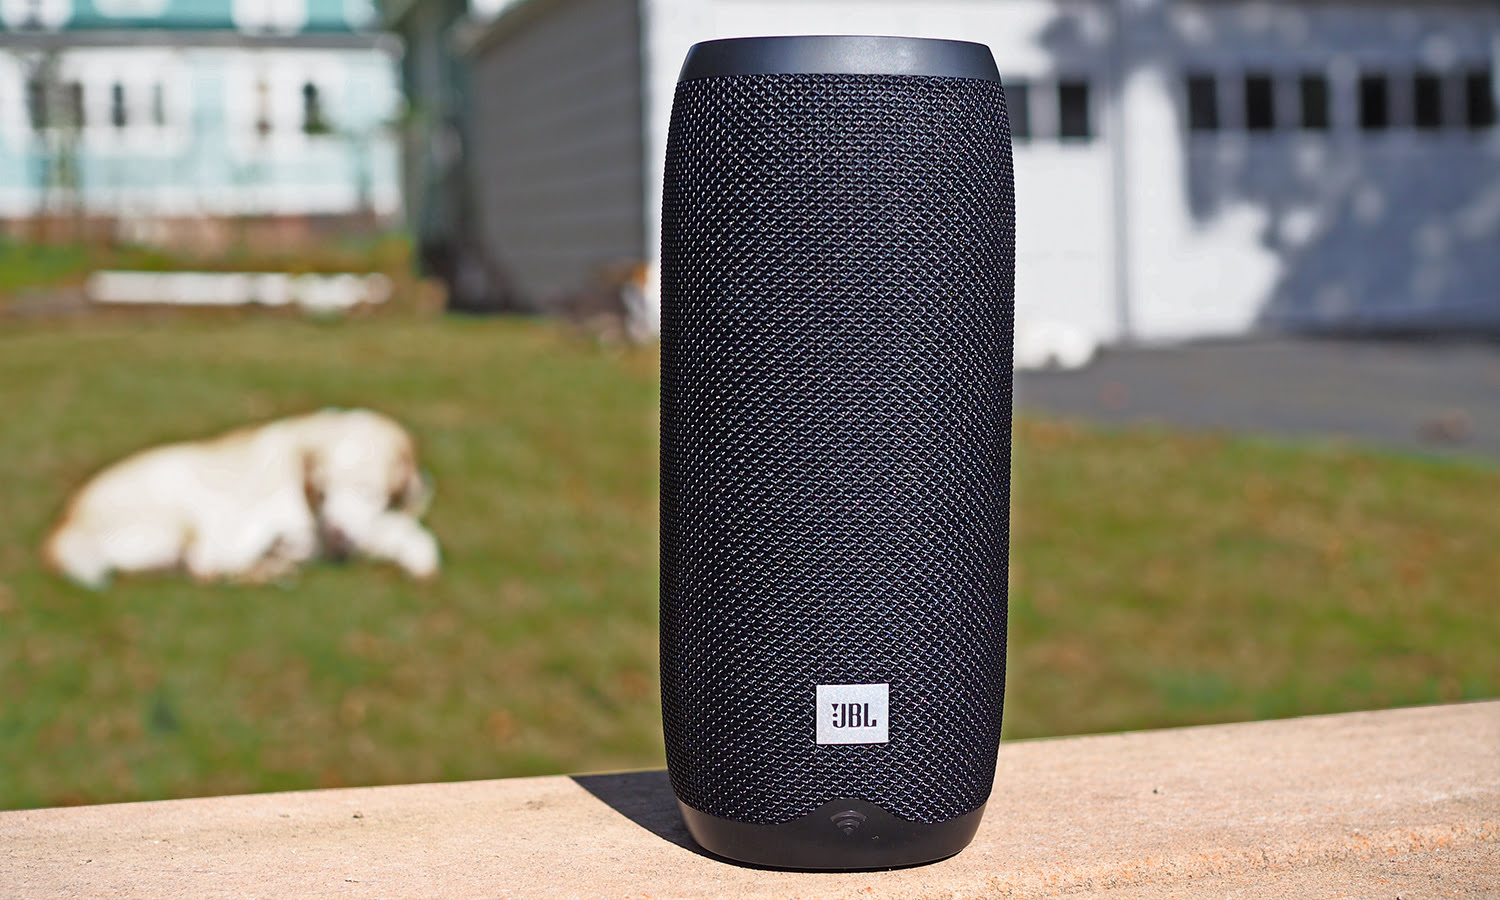 How To Reset JBL Google Home